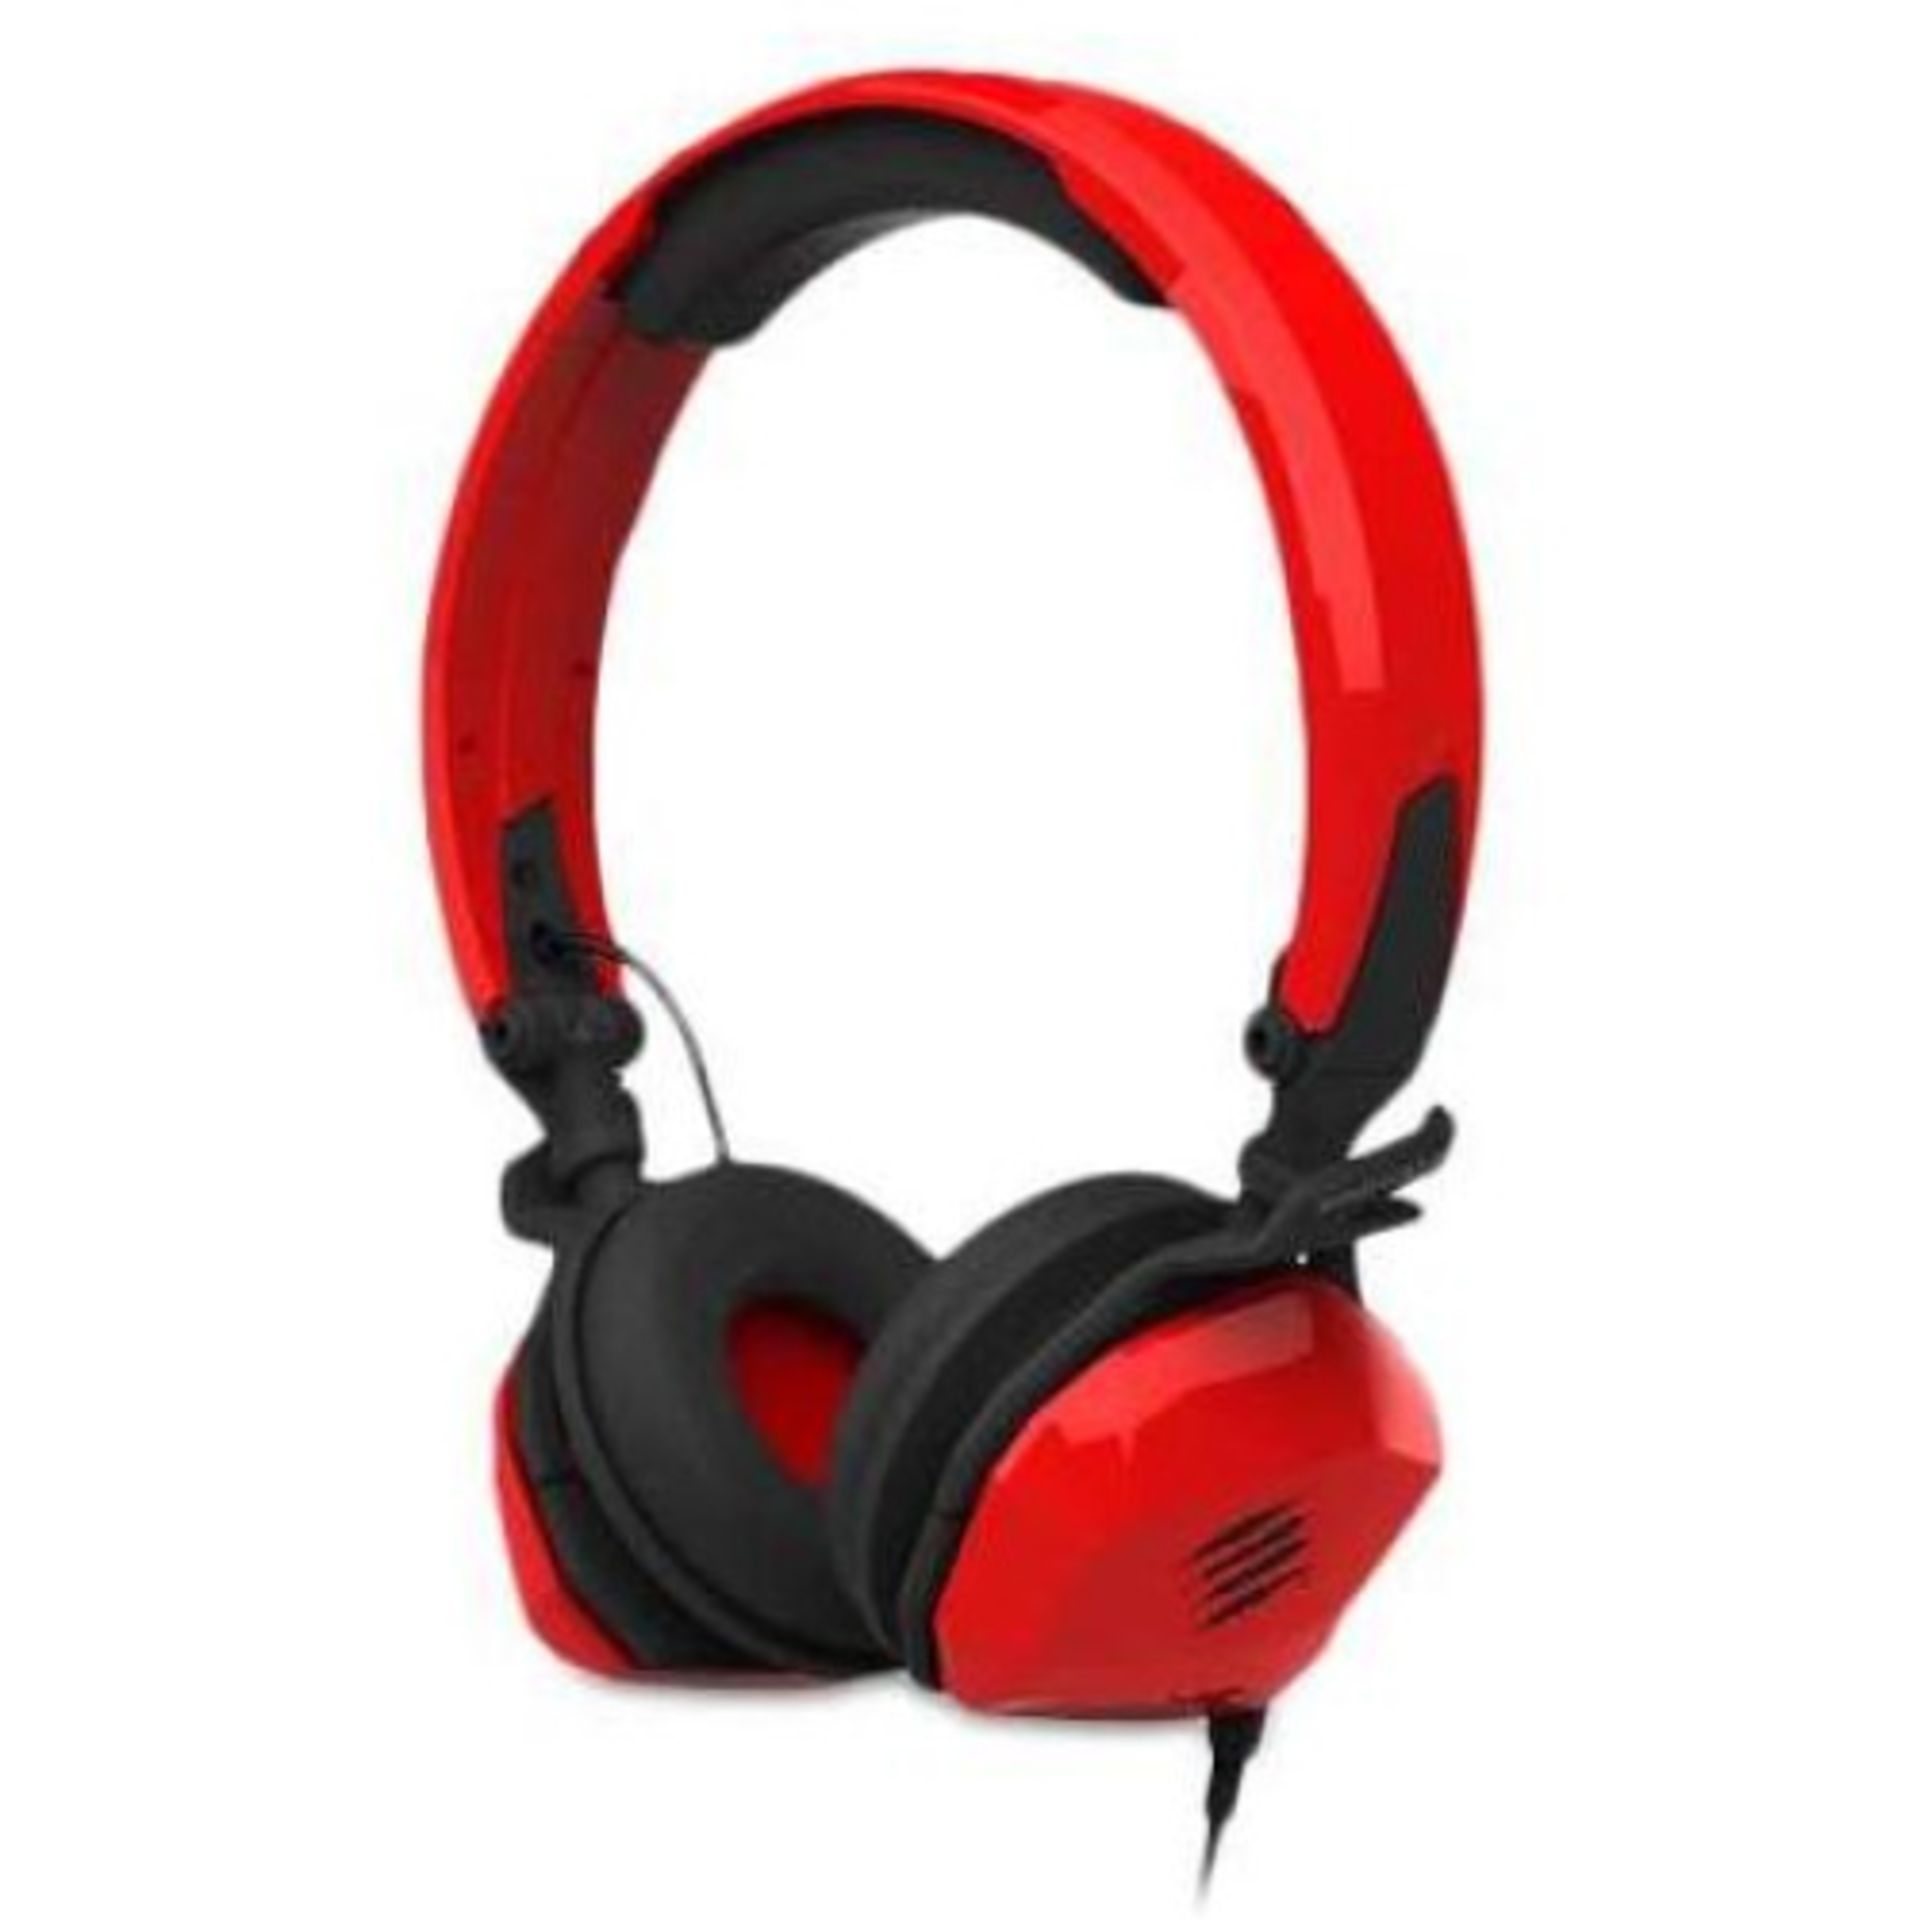 V Brand New Madcatz F.R.E.Q.M Wireless Mobile Gaming Headset Gloss Red X 2 YOUR BID PRICE TO BE